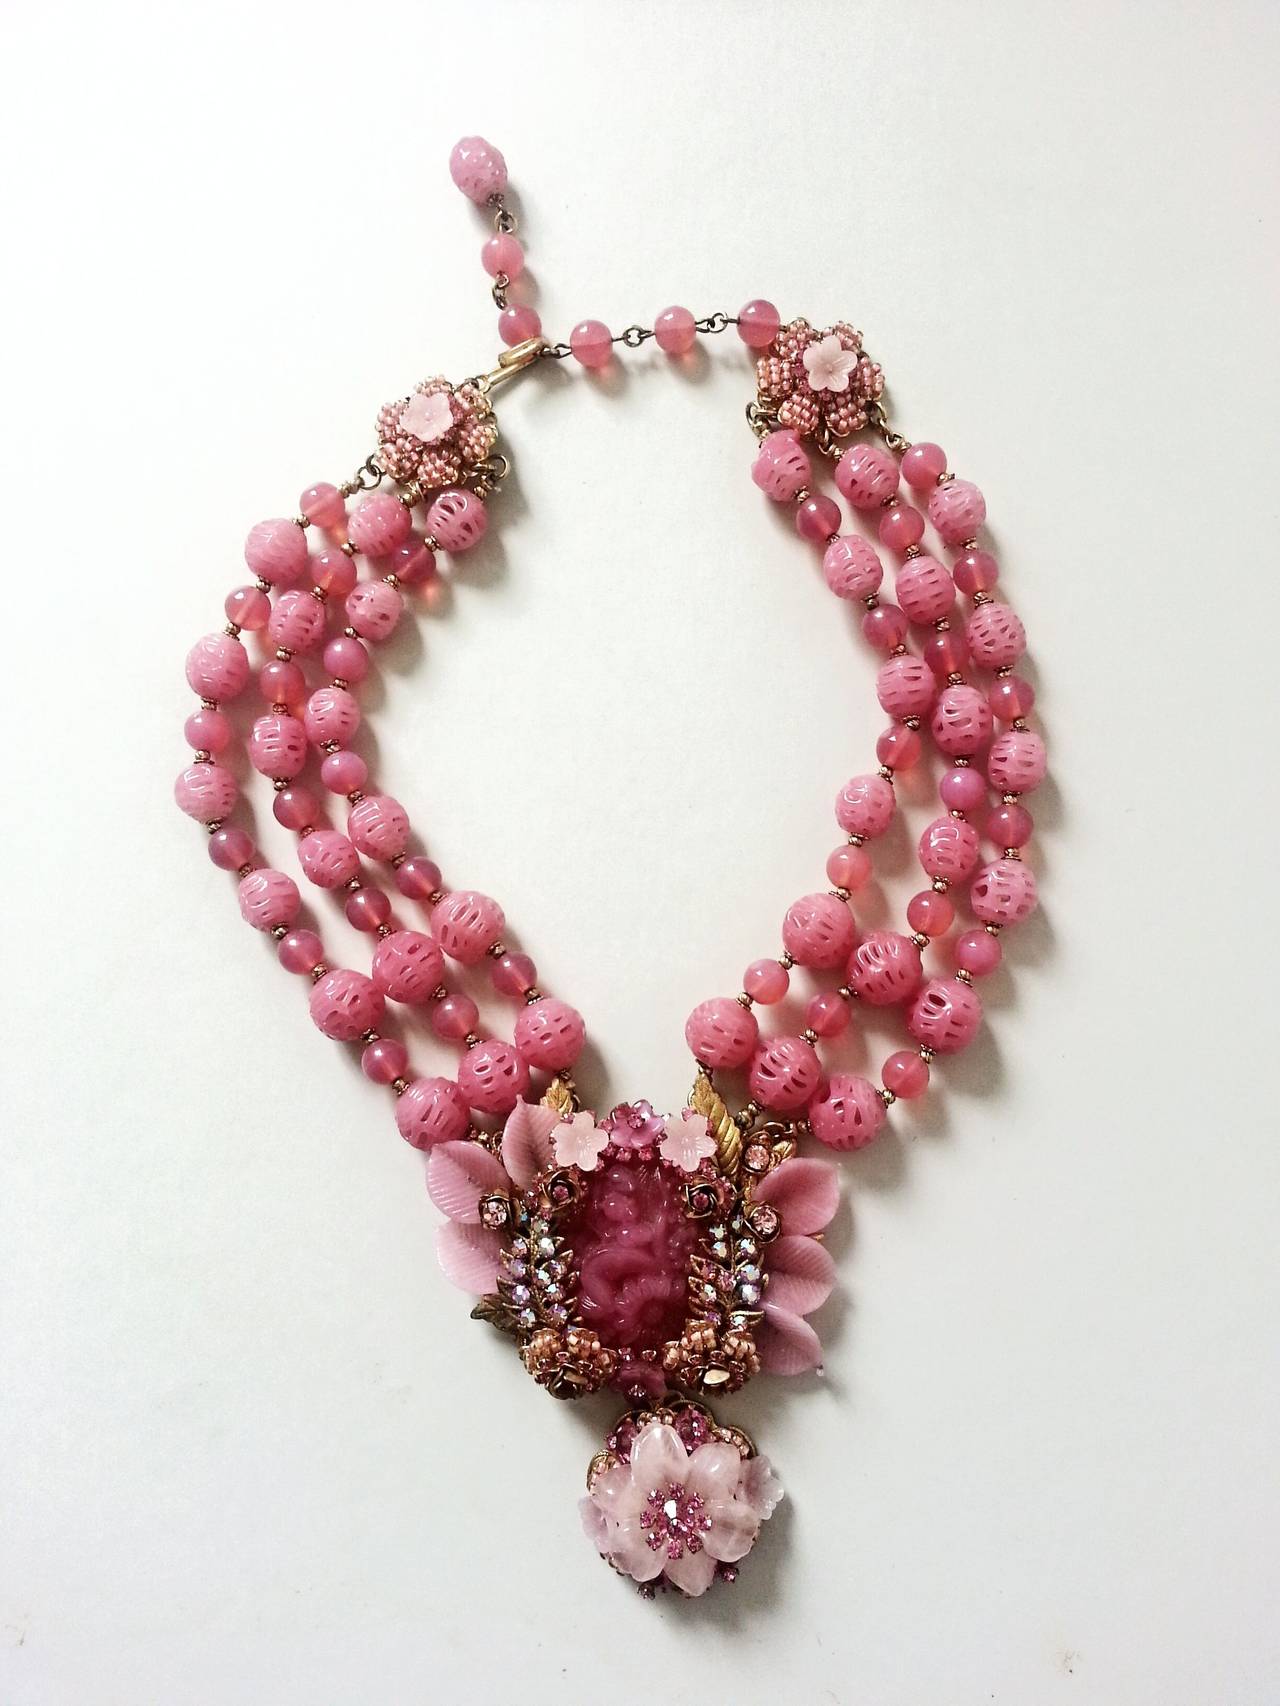 Baroque Revival Astounding Vintage Couture Stanley Hagler Shades of Rose Baroque Necklace